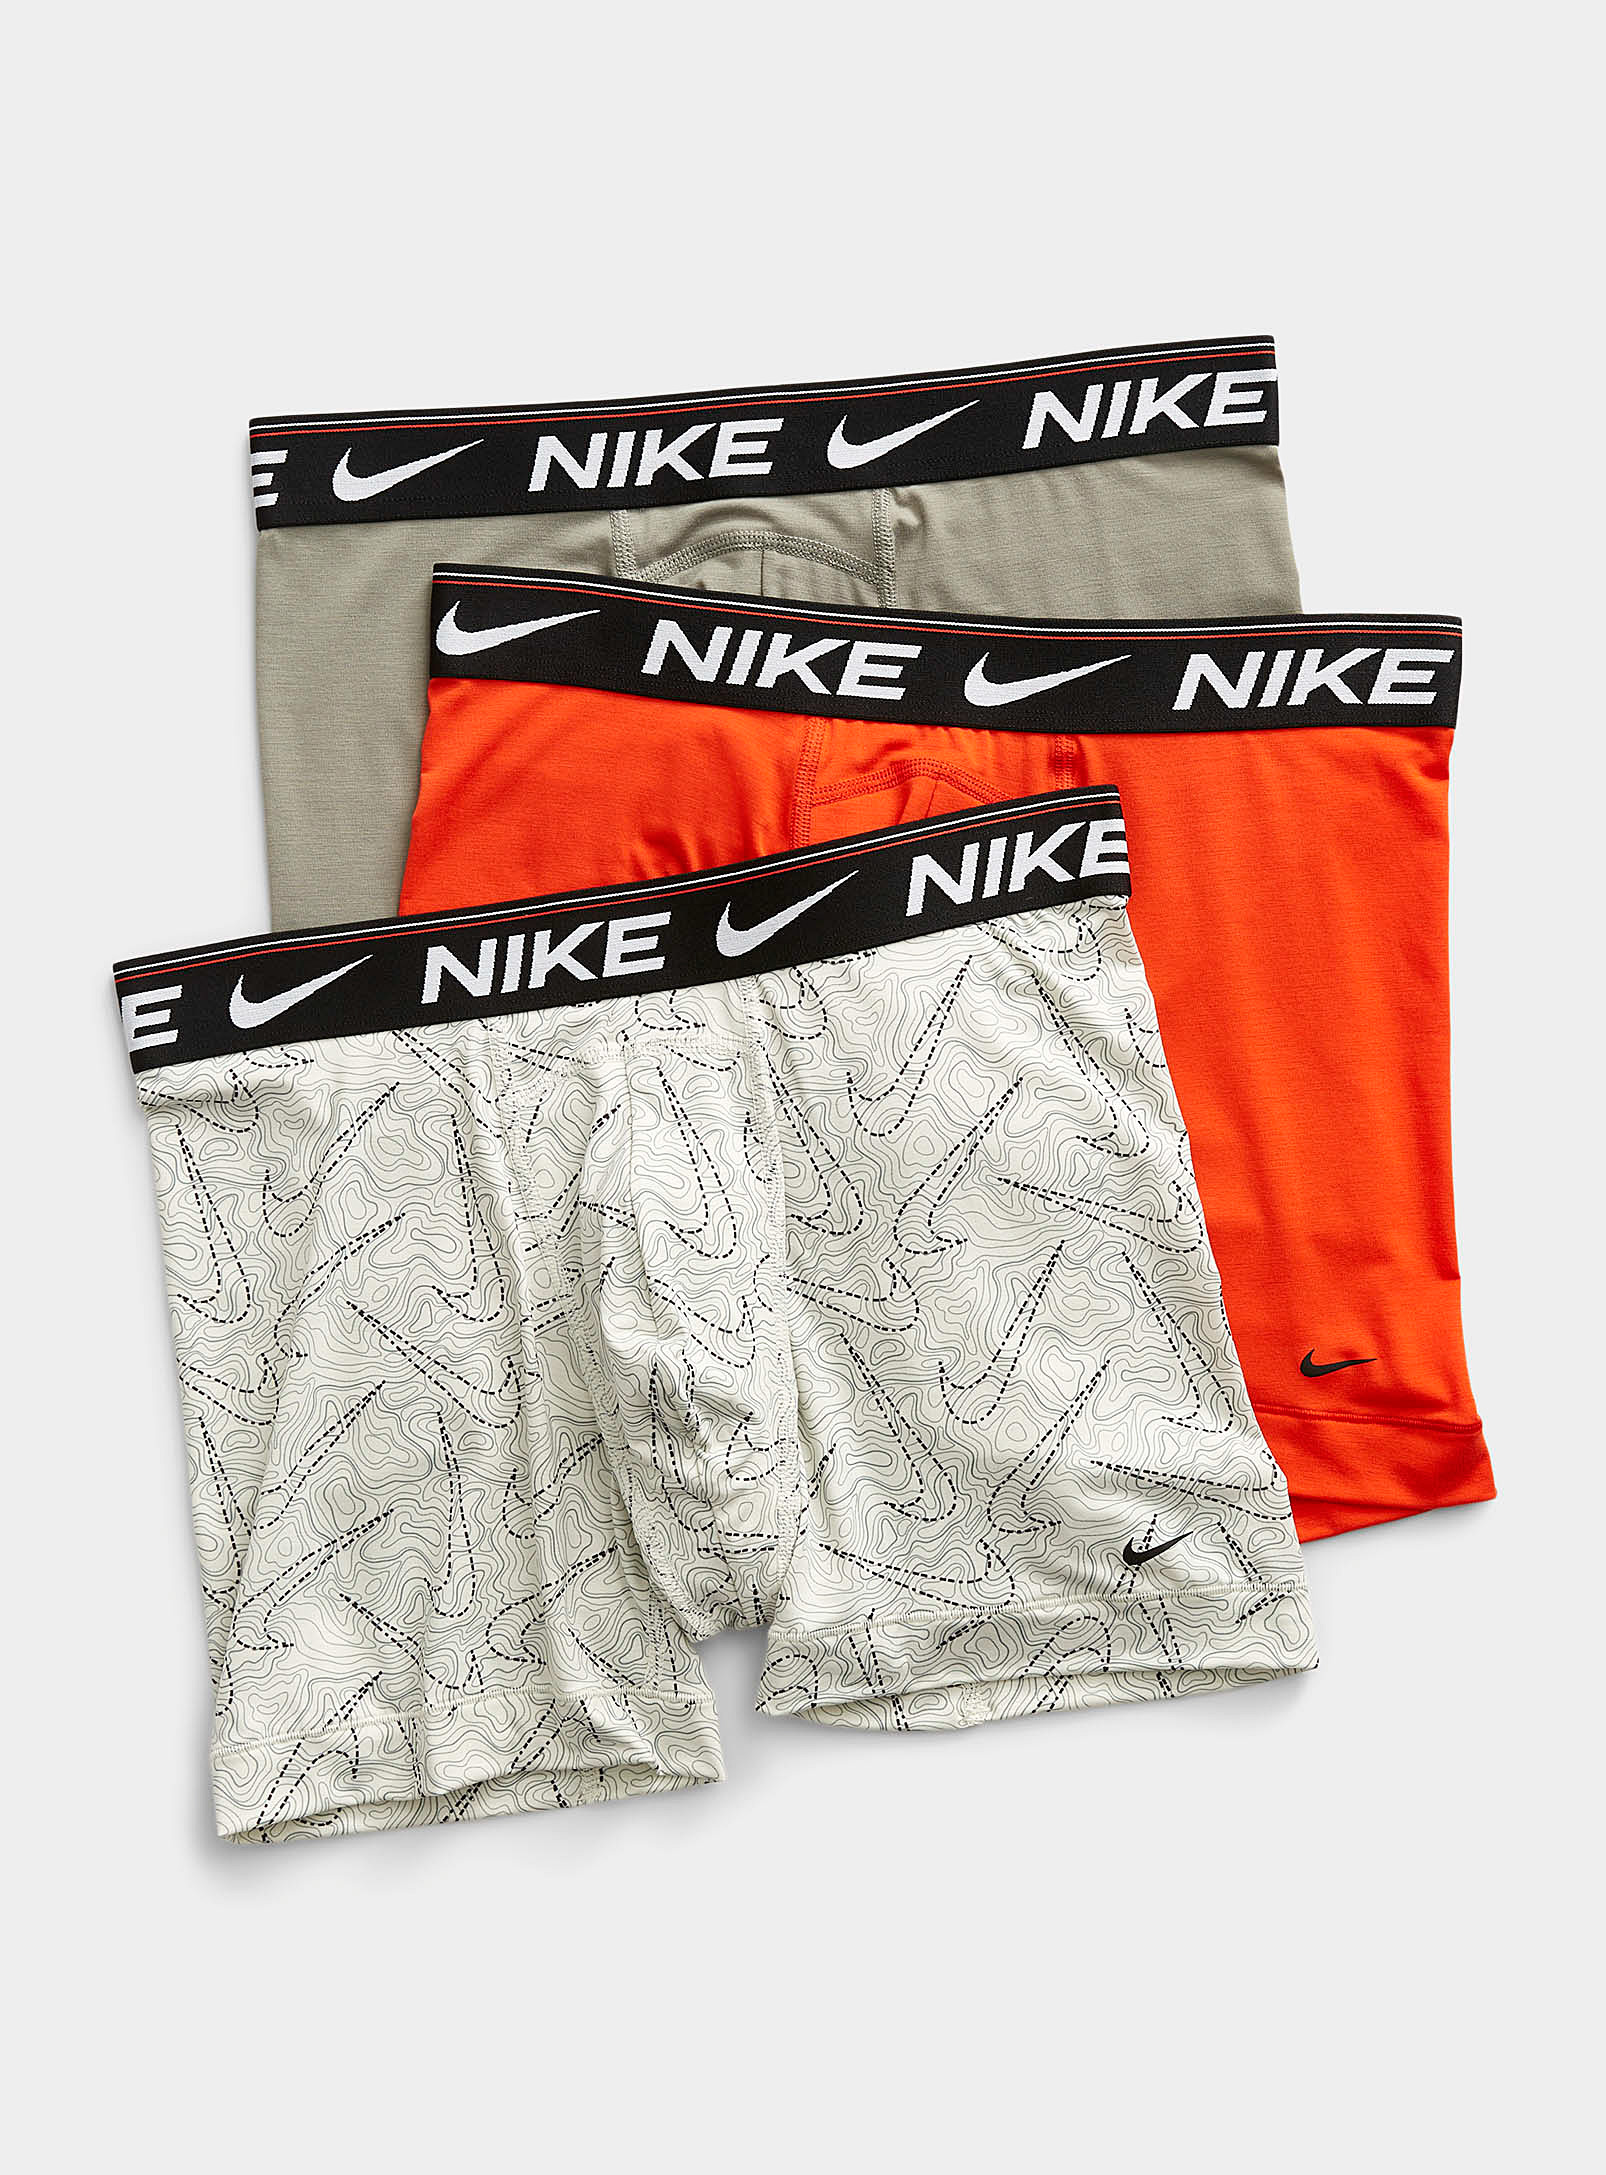 Nike Solid And Patterned Dri-fit Ultra Comfort Boxer Briefs 3-pack In Patterned Red